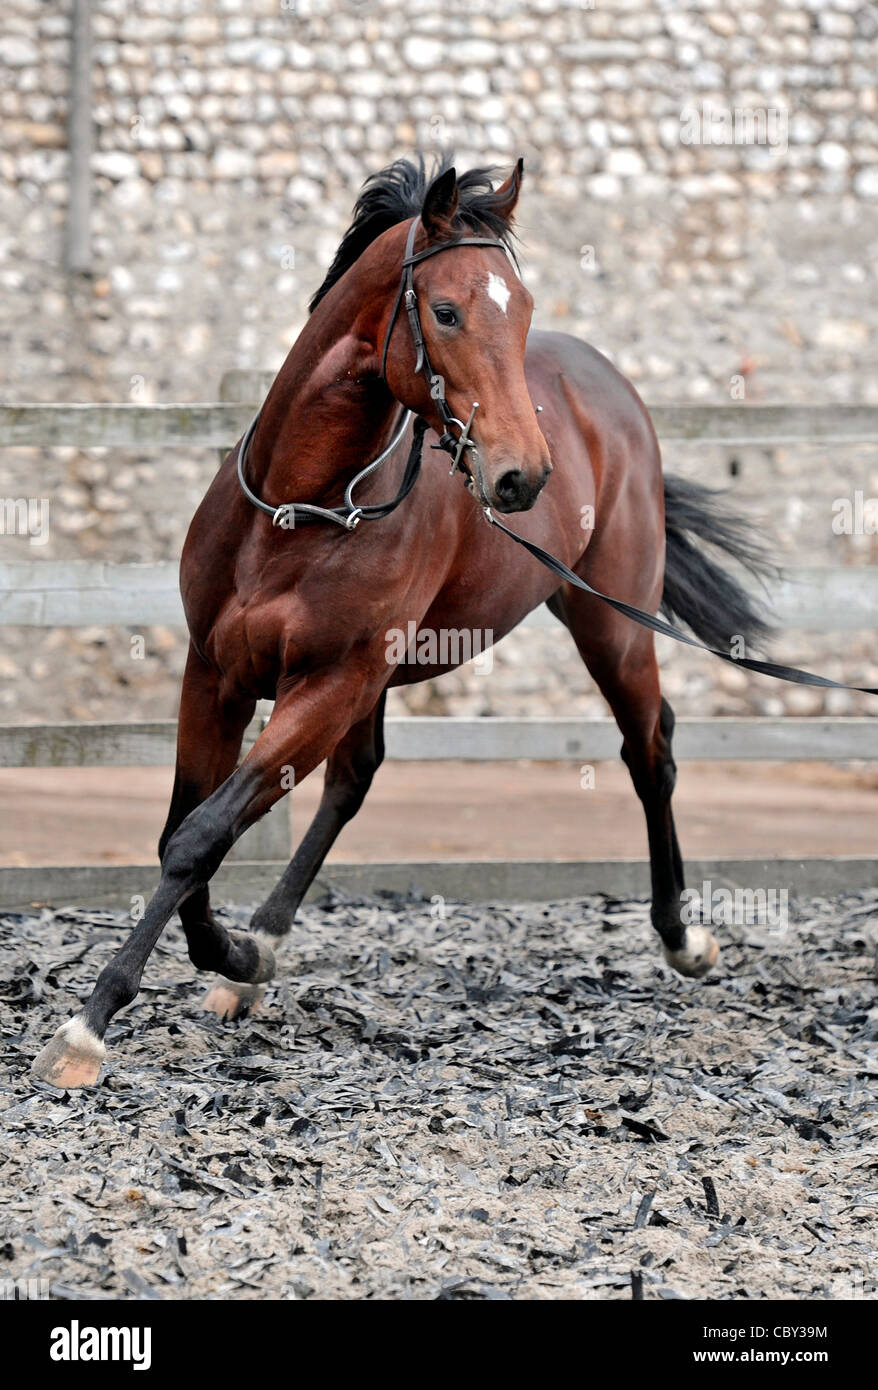 Young race horse being trained. Stock Photo